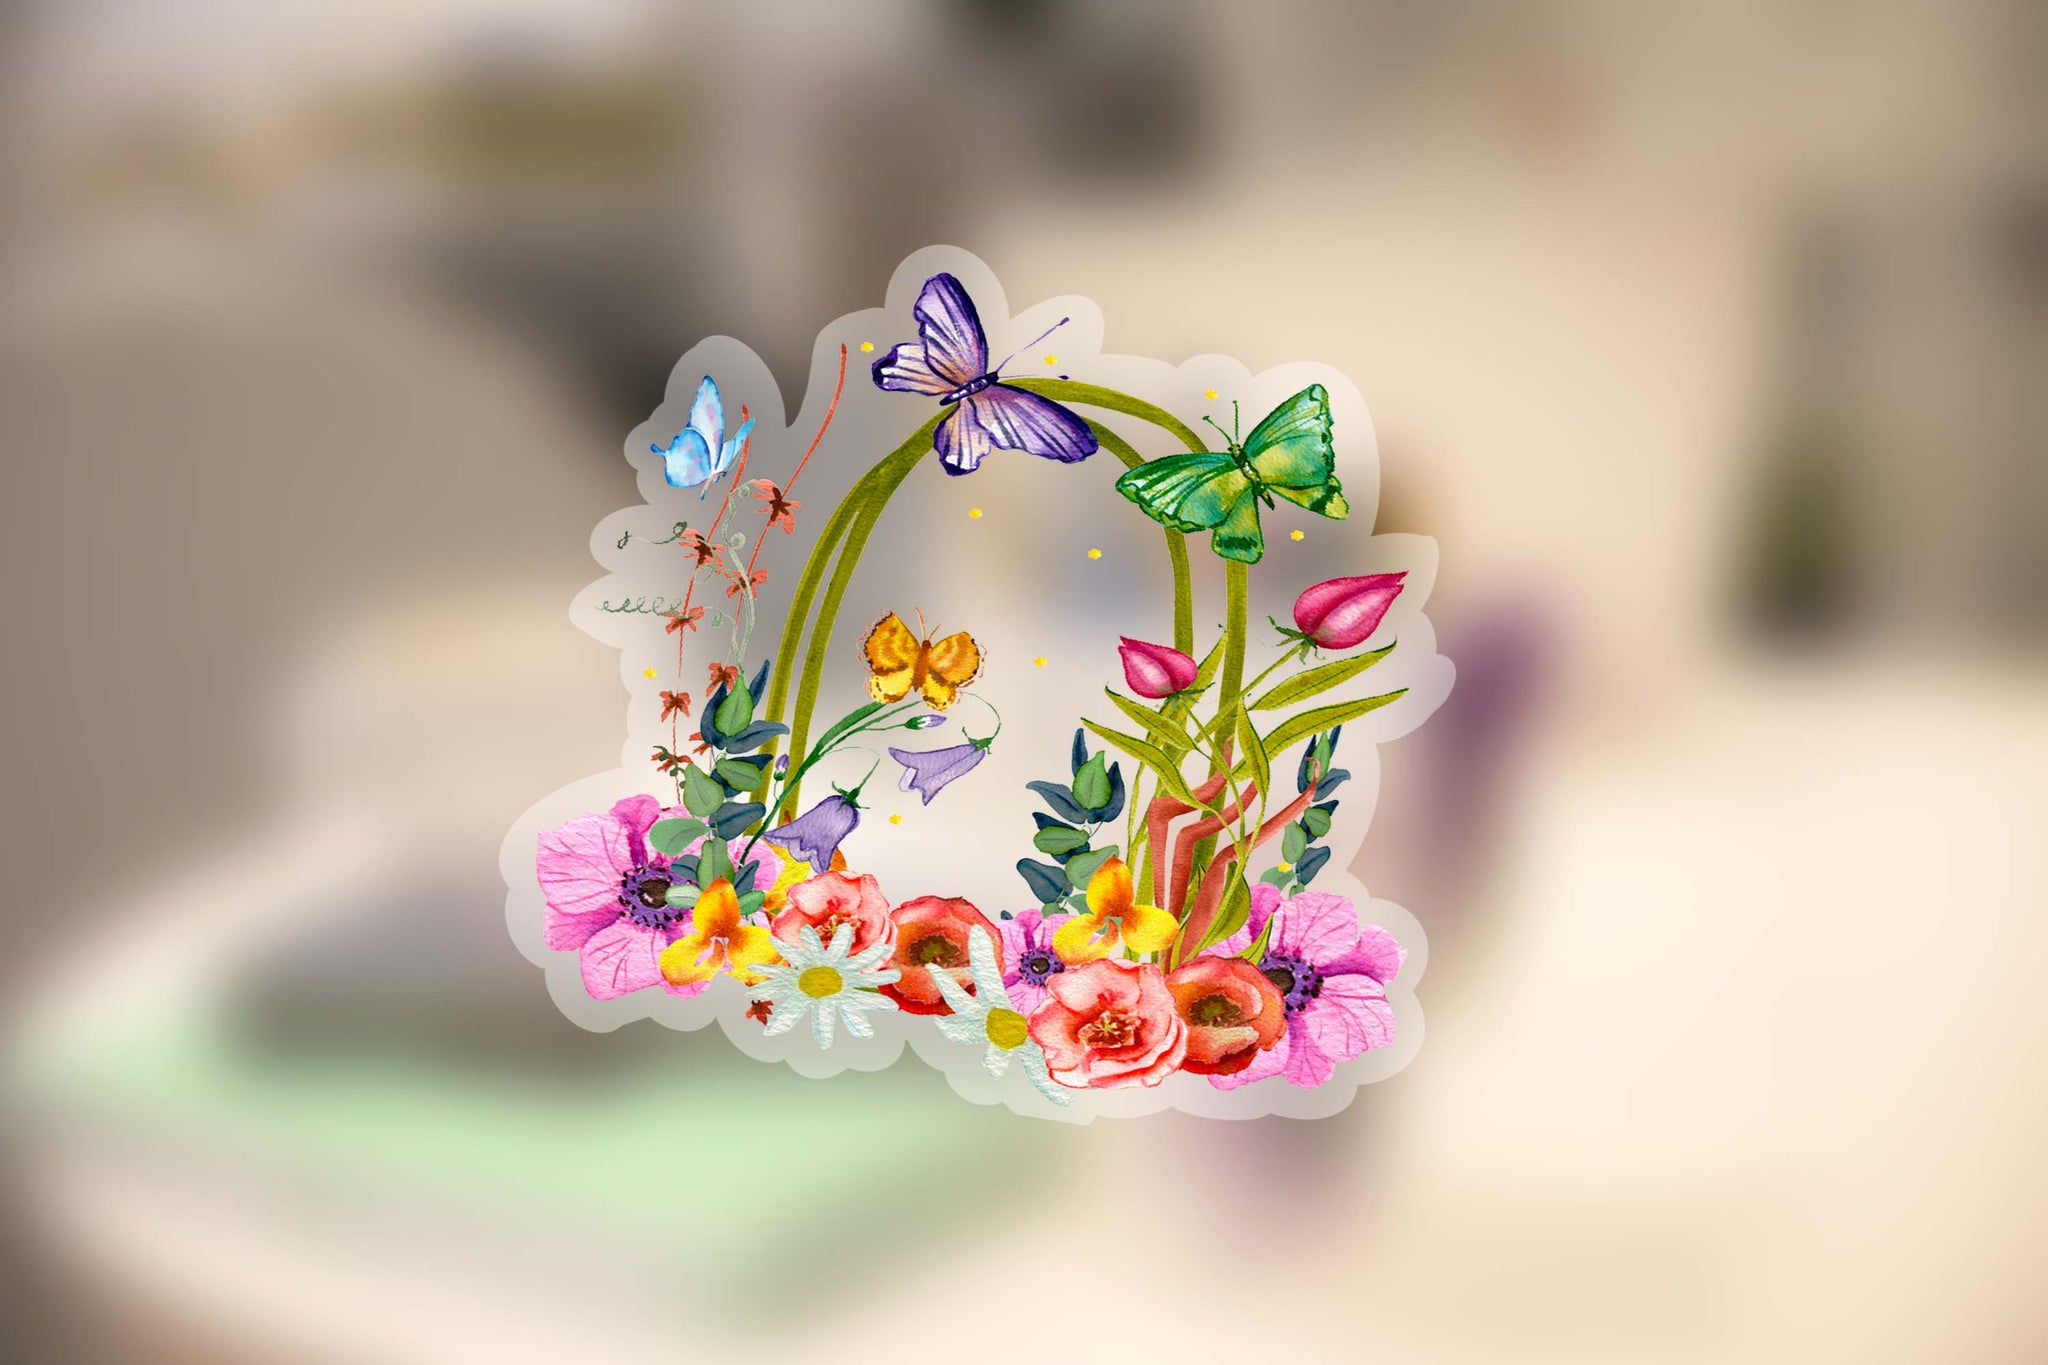 Wildflower stickers II: Let the beauty of nature bloom in your